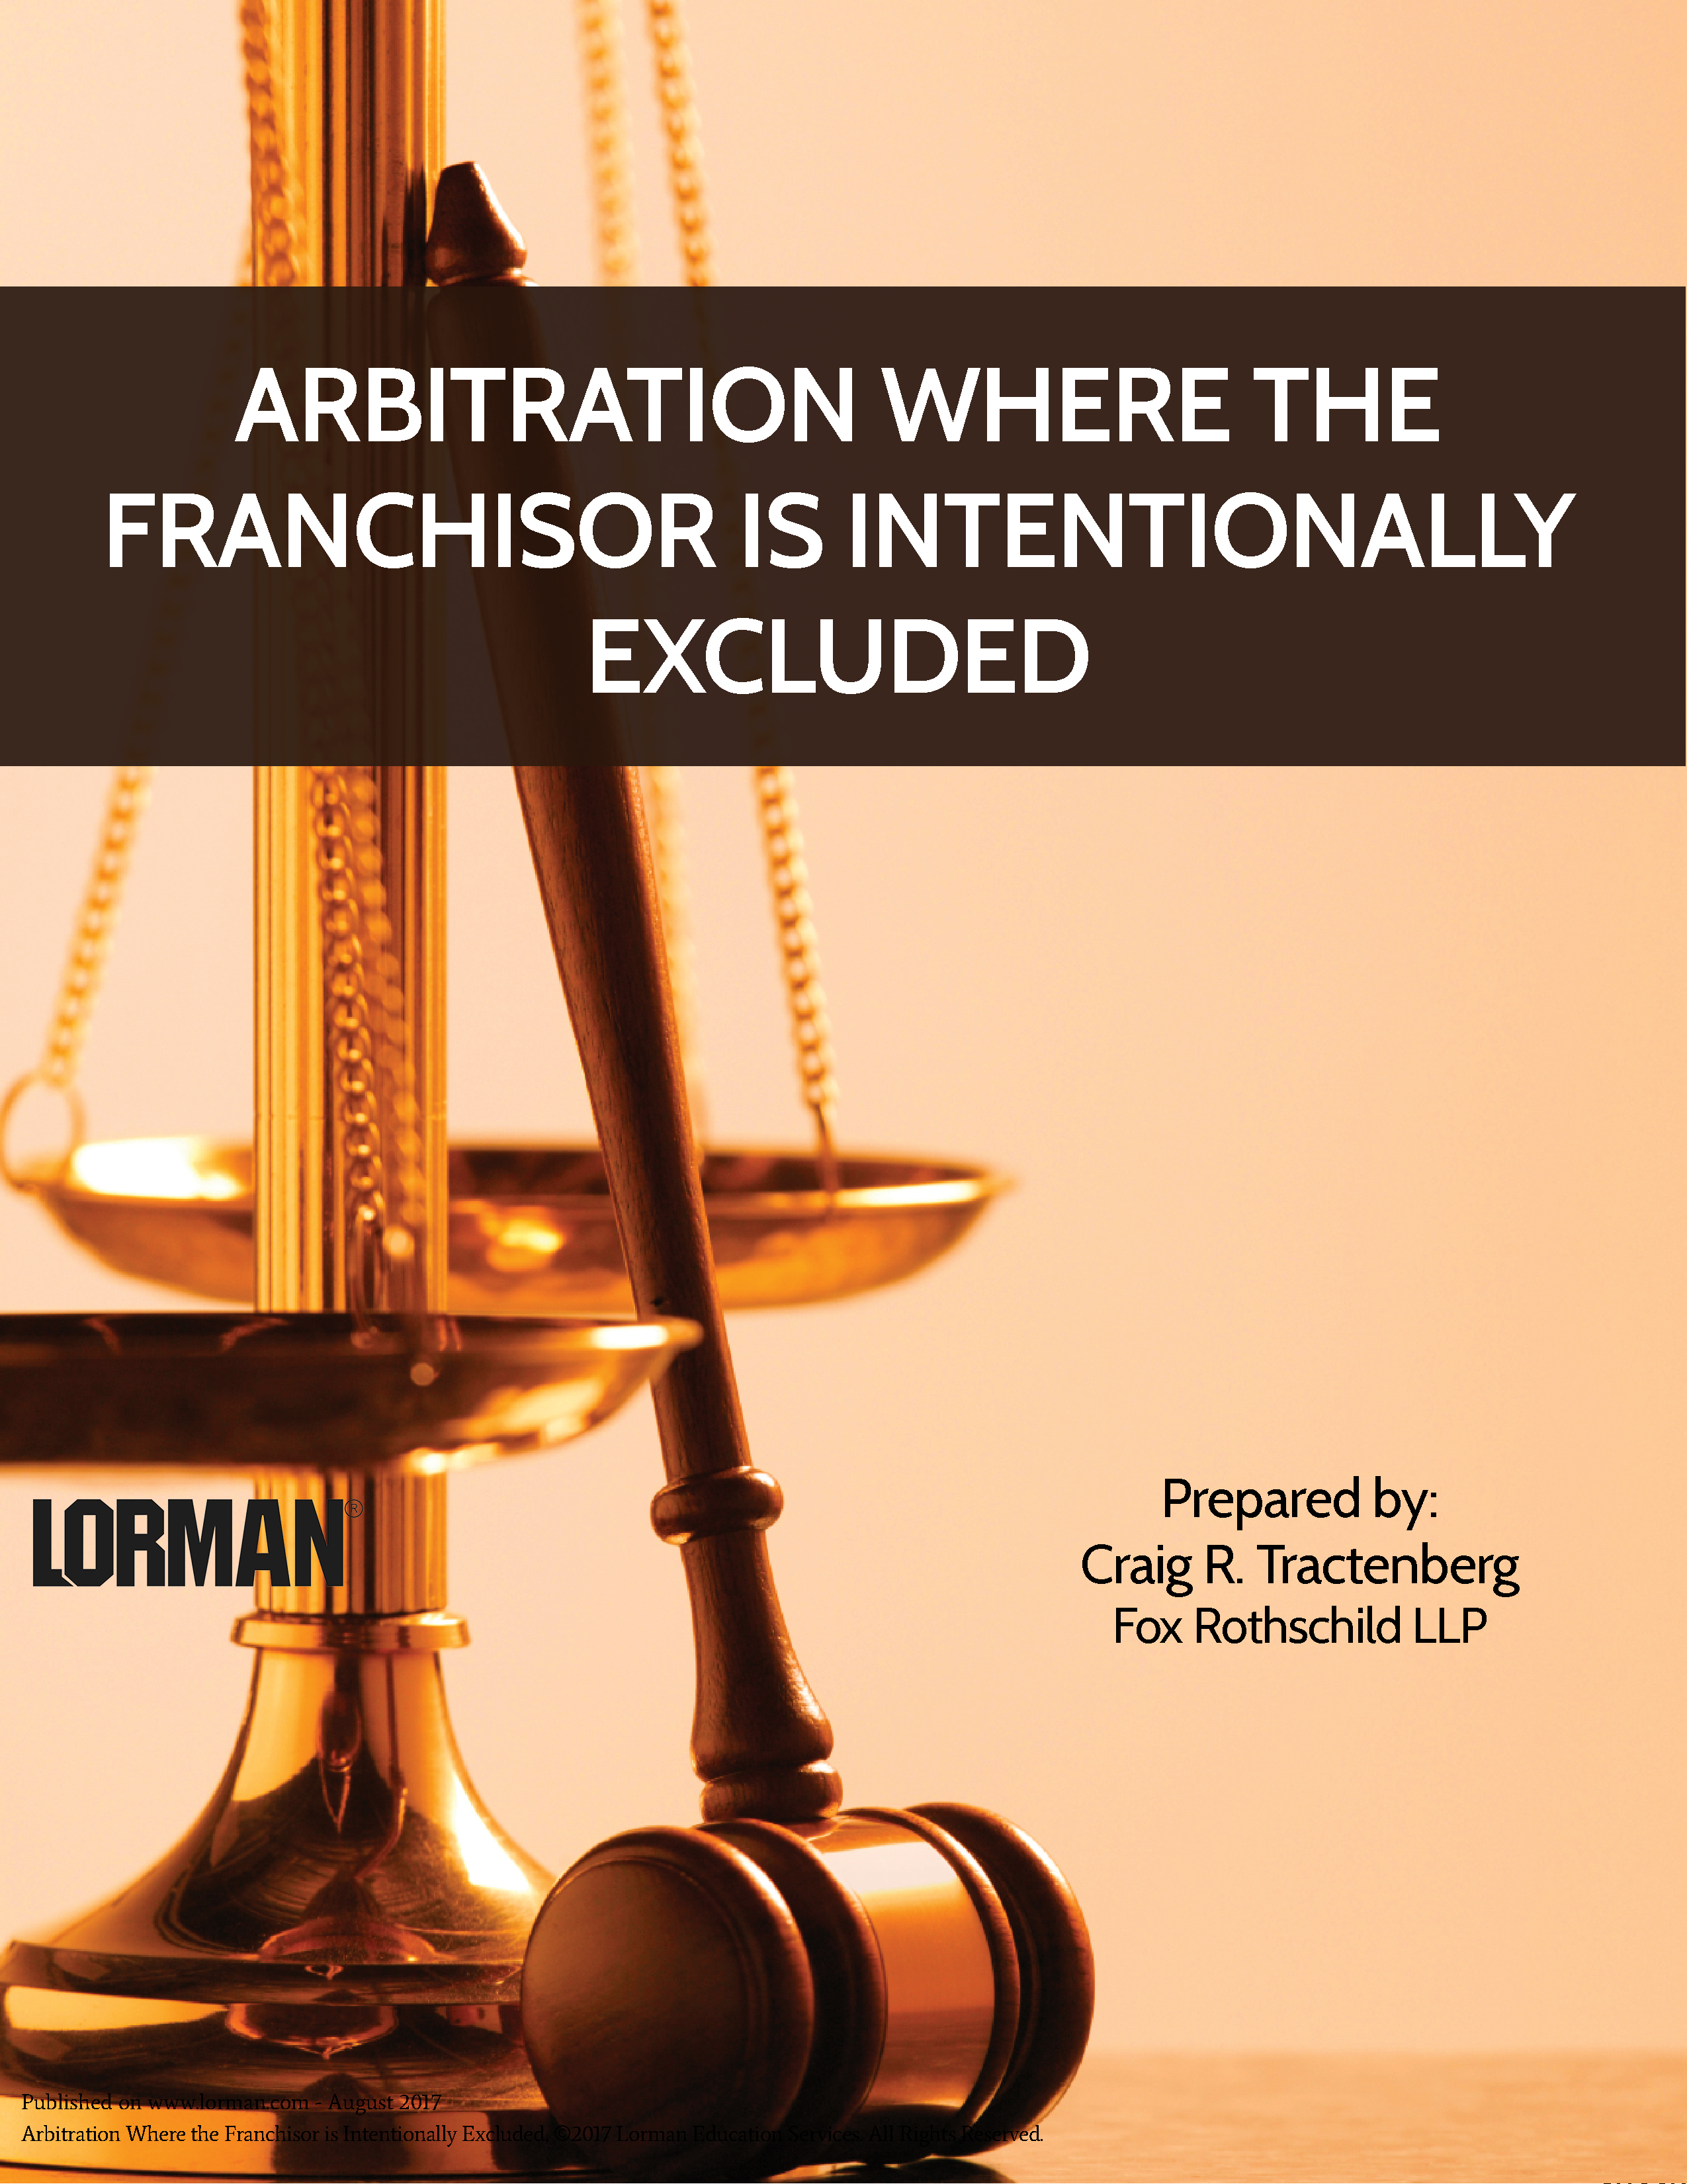 Arbitration Where the Franchisor is Intentionally Excluded